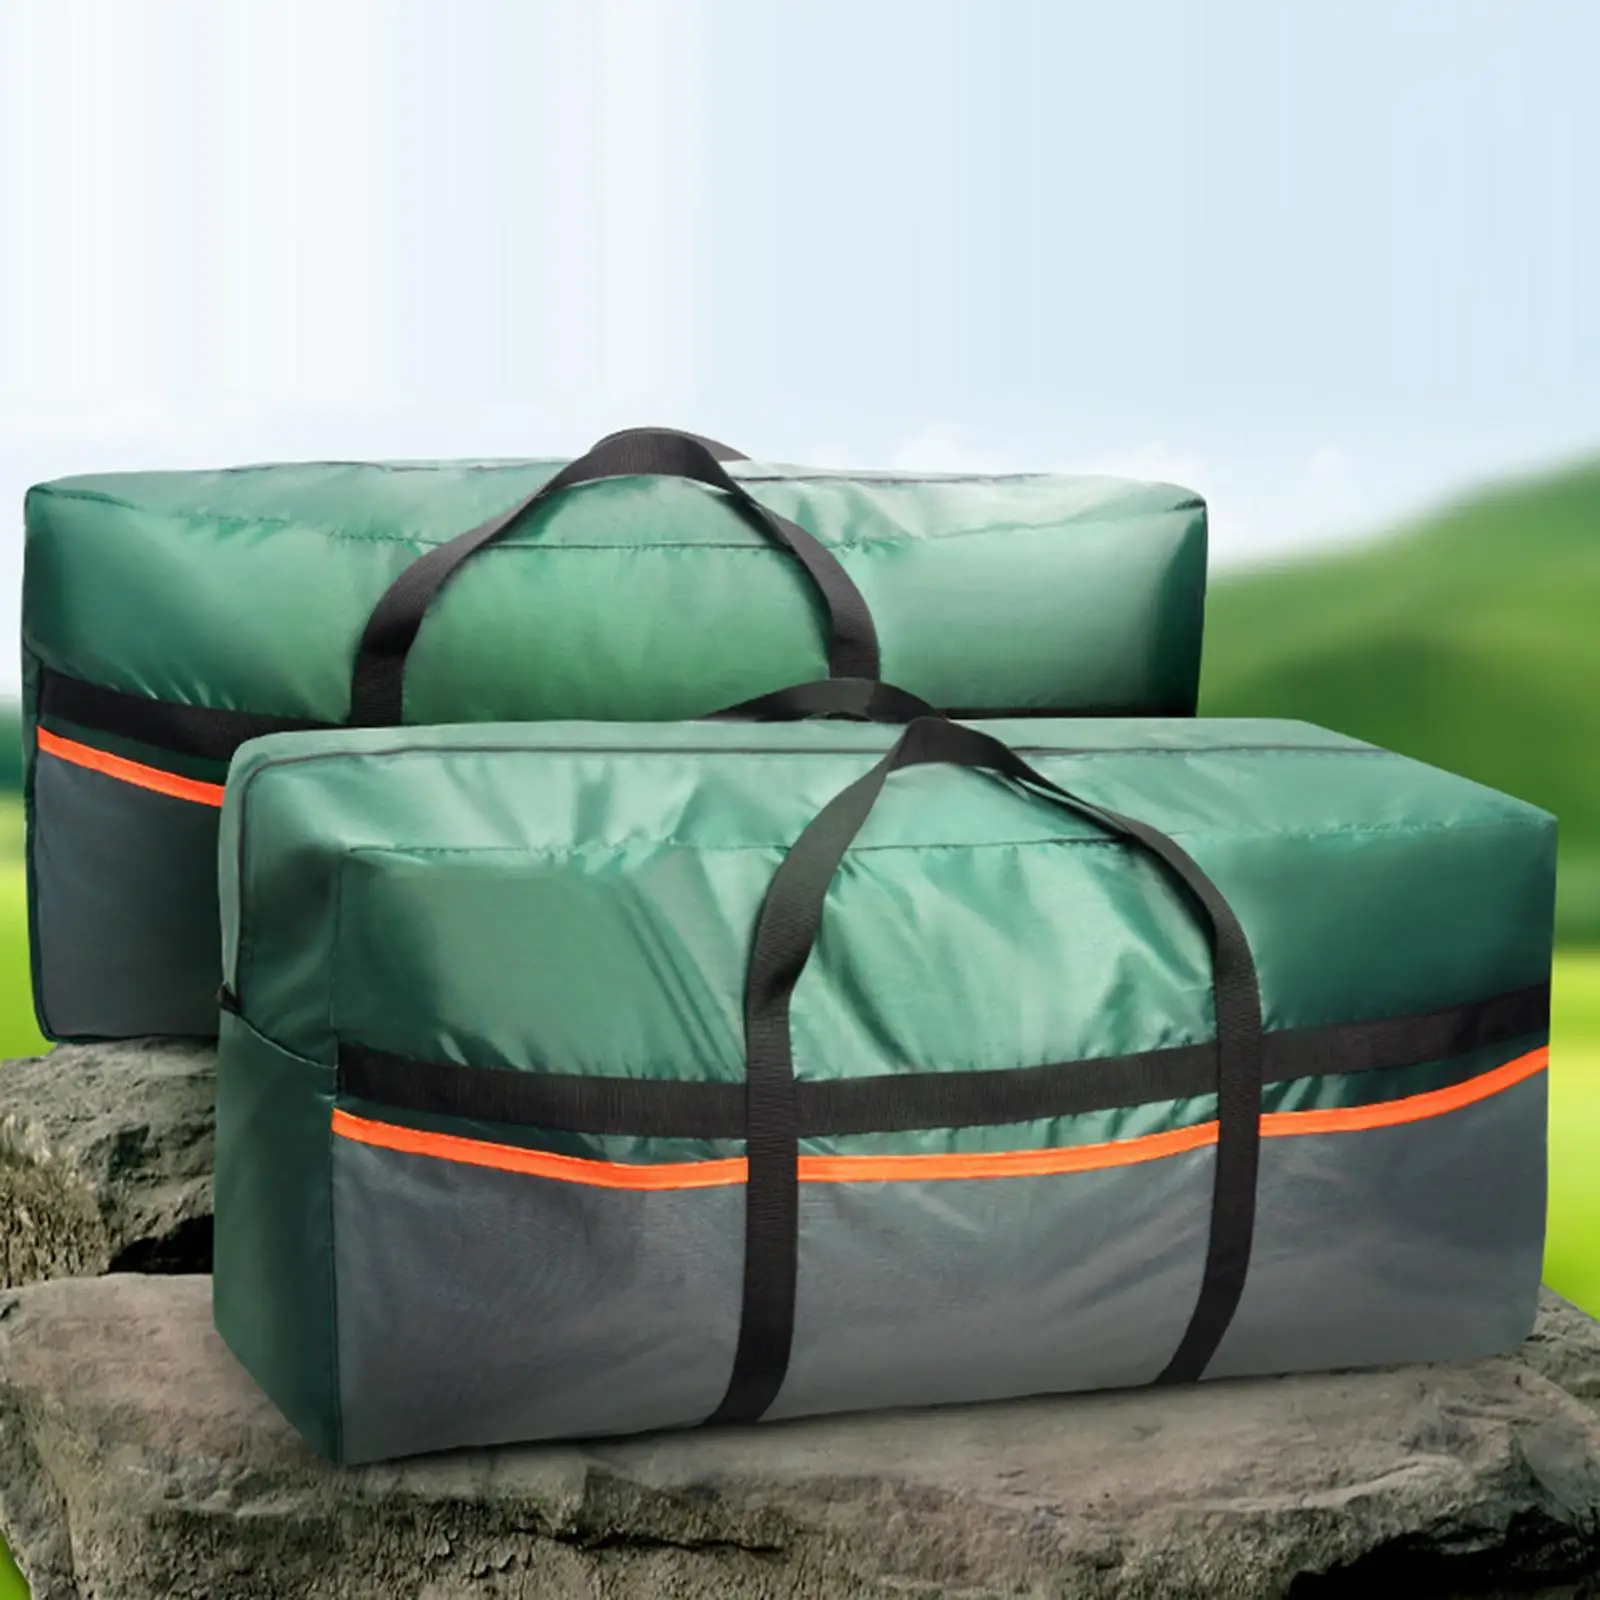 Tent Storage Bag Zippered Duffel Bag for Self Driving Tour Camp Tarp Outdoor Picnic Others Tools Organizing Containers